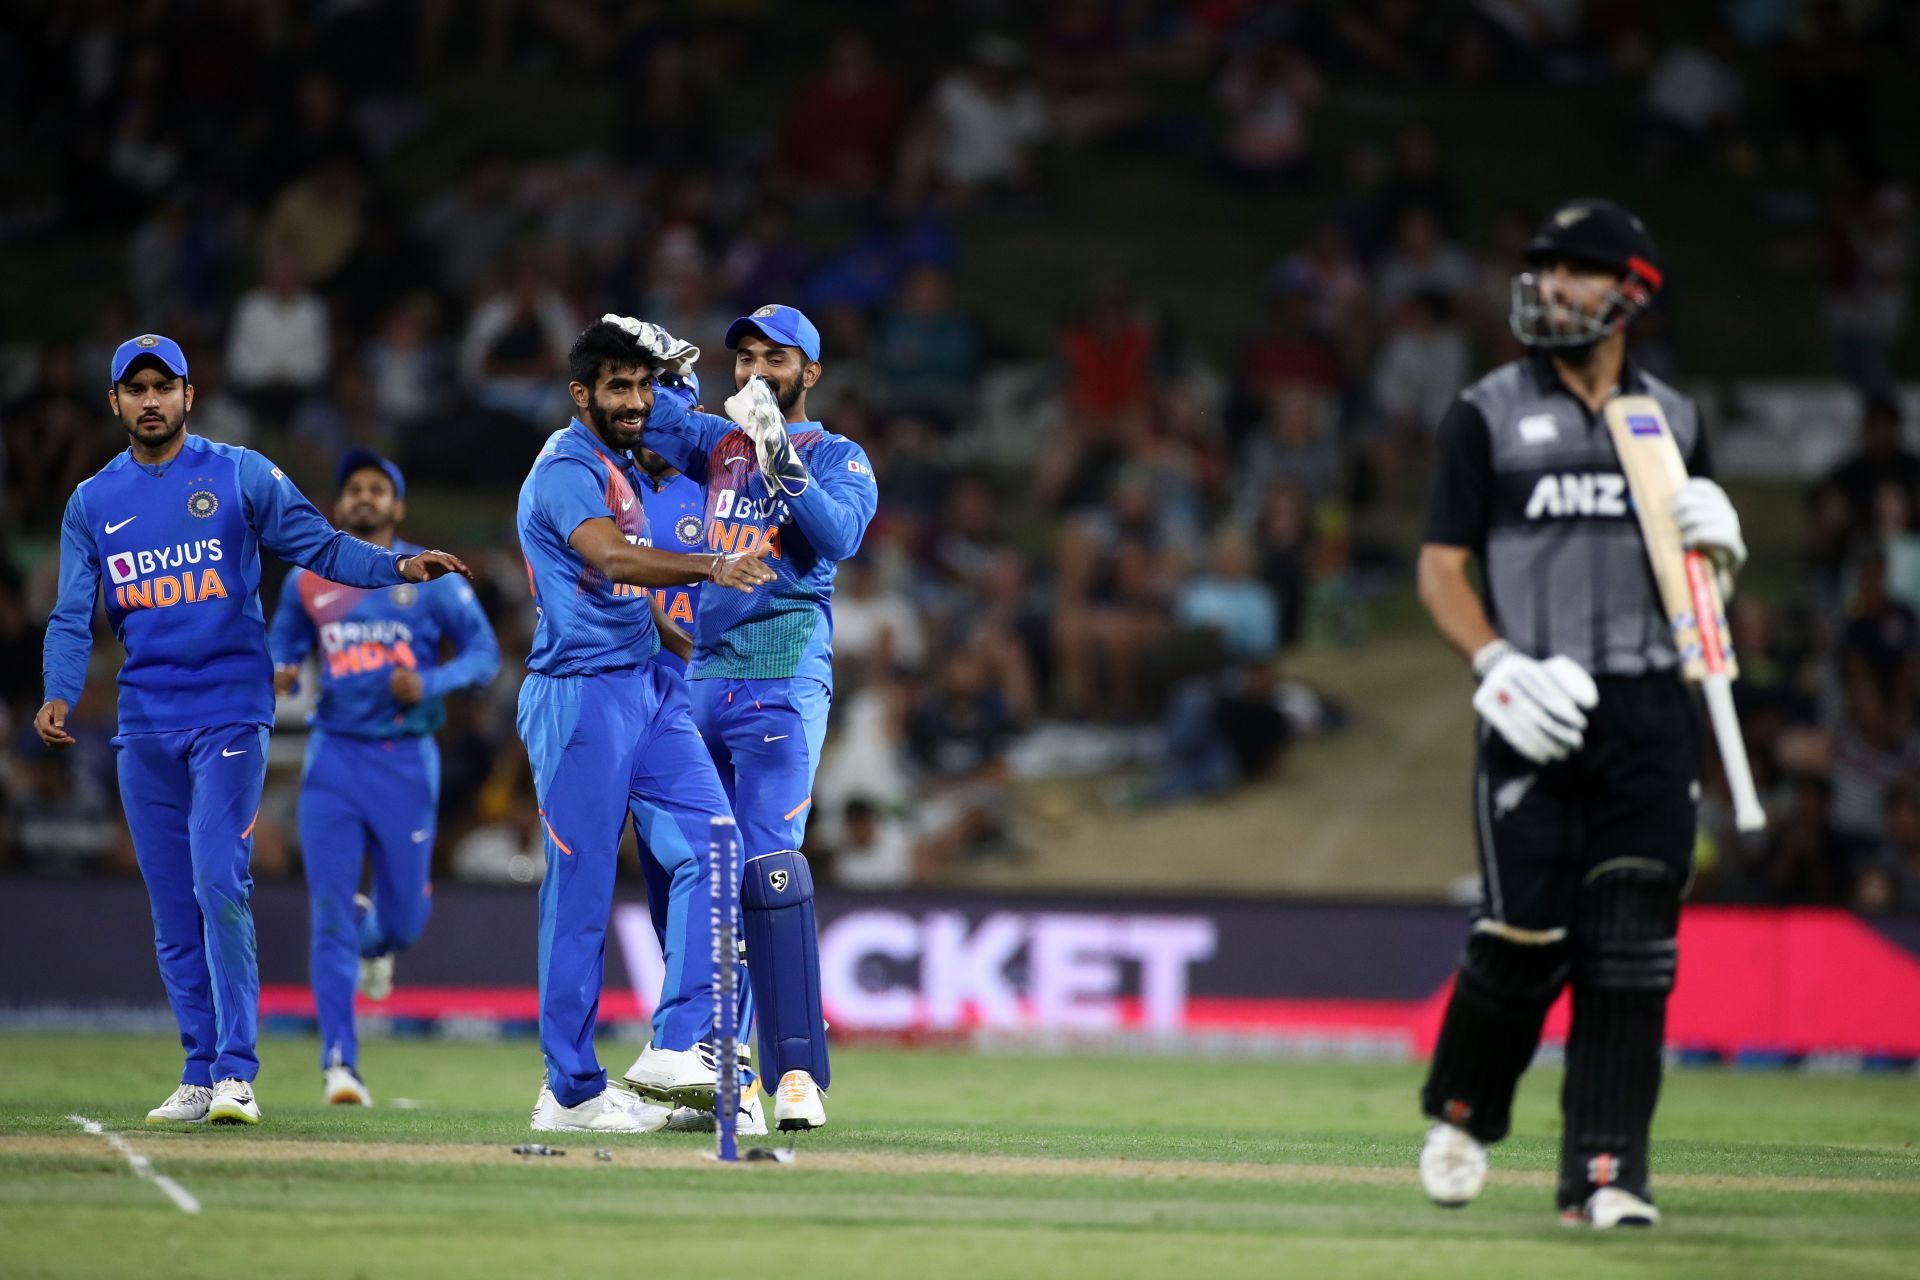 New Zealand v India - T20: Game 5 (Image: Getty)